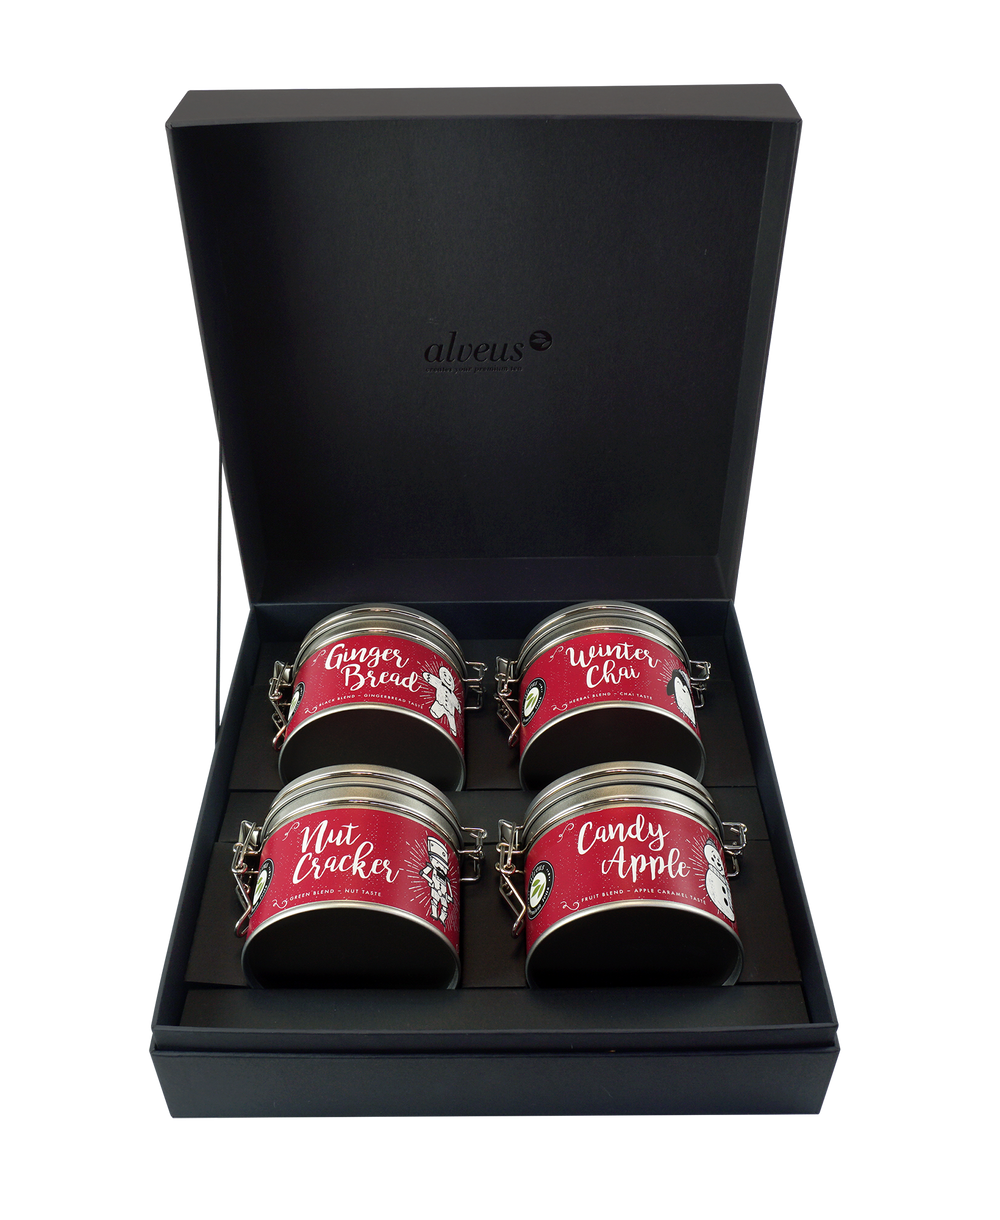 Winter tea - gift box 4 cans of 100g each